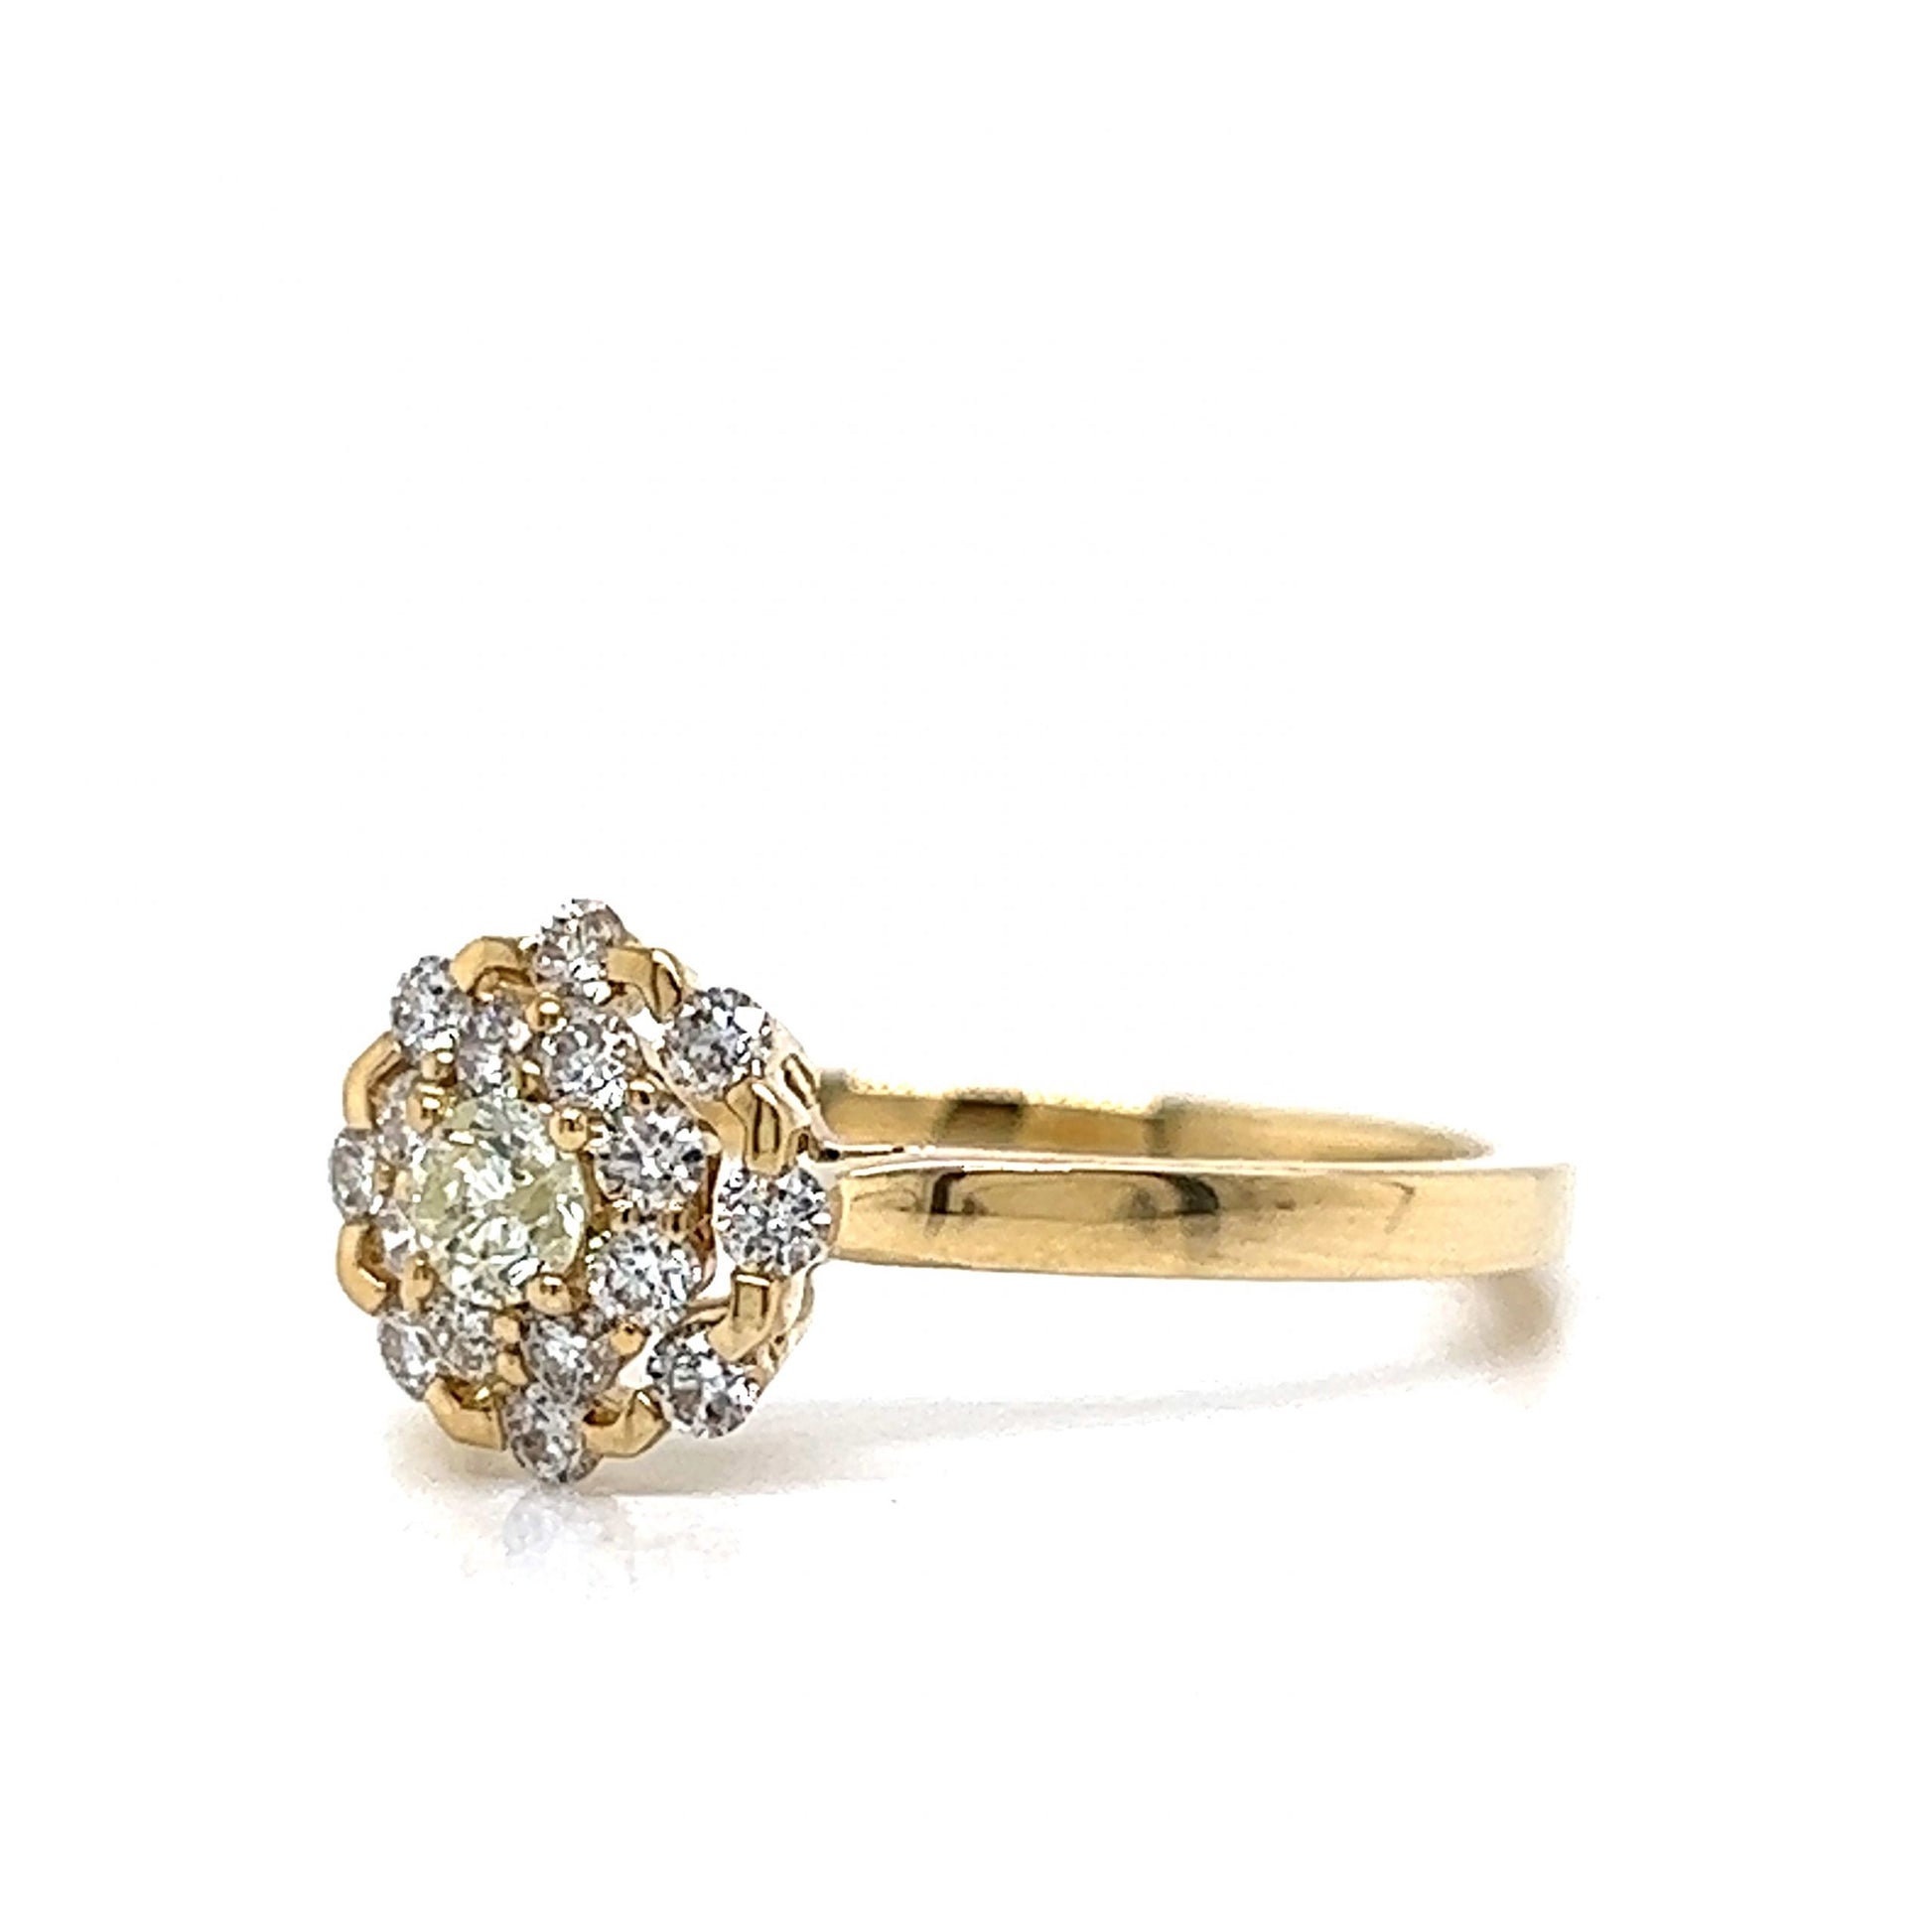 .50 Modern Round Diamond Cluster Engagement Ring in 14k Gold